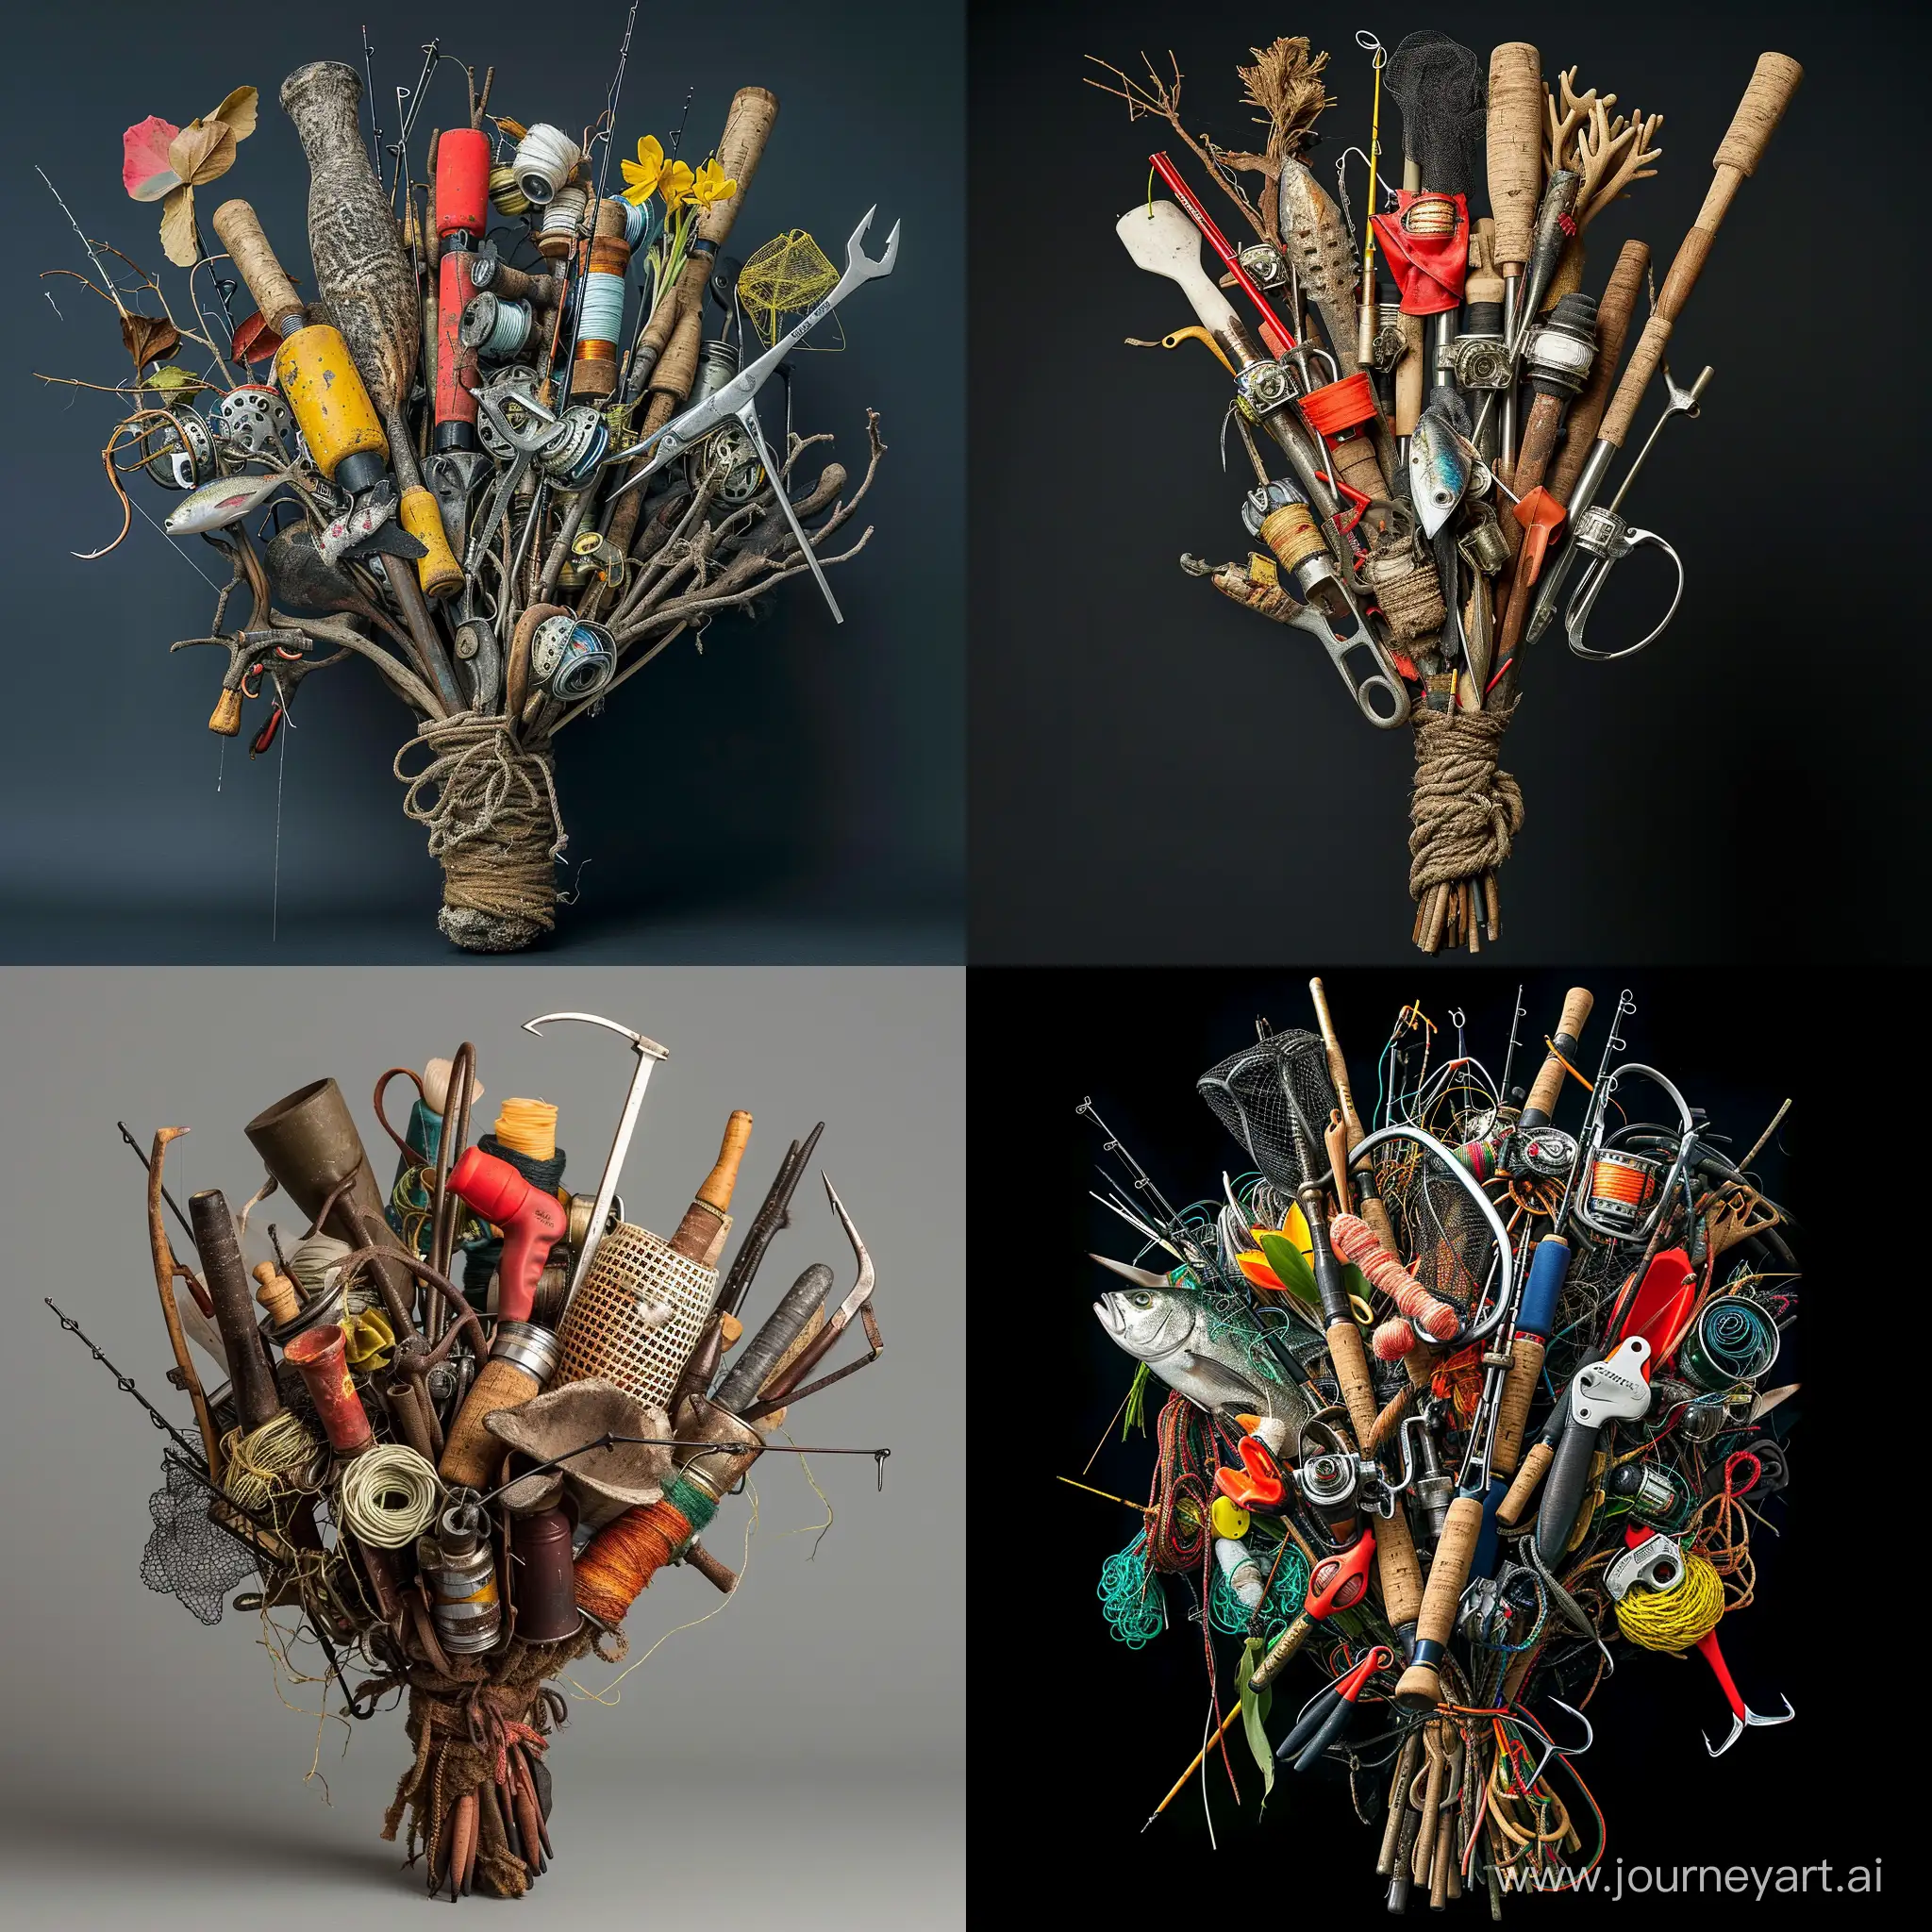 Vibrant-Bouquet-of-Fishing-Gear-and-Tools-Unique-Vertical-Composition